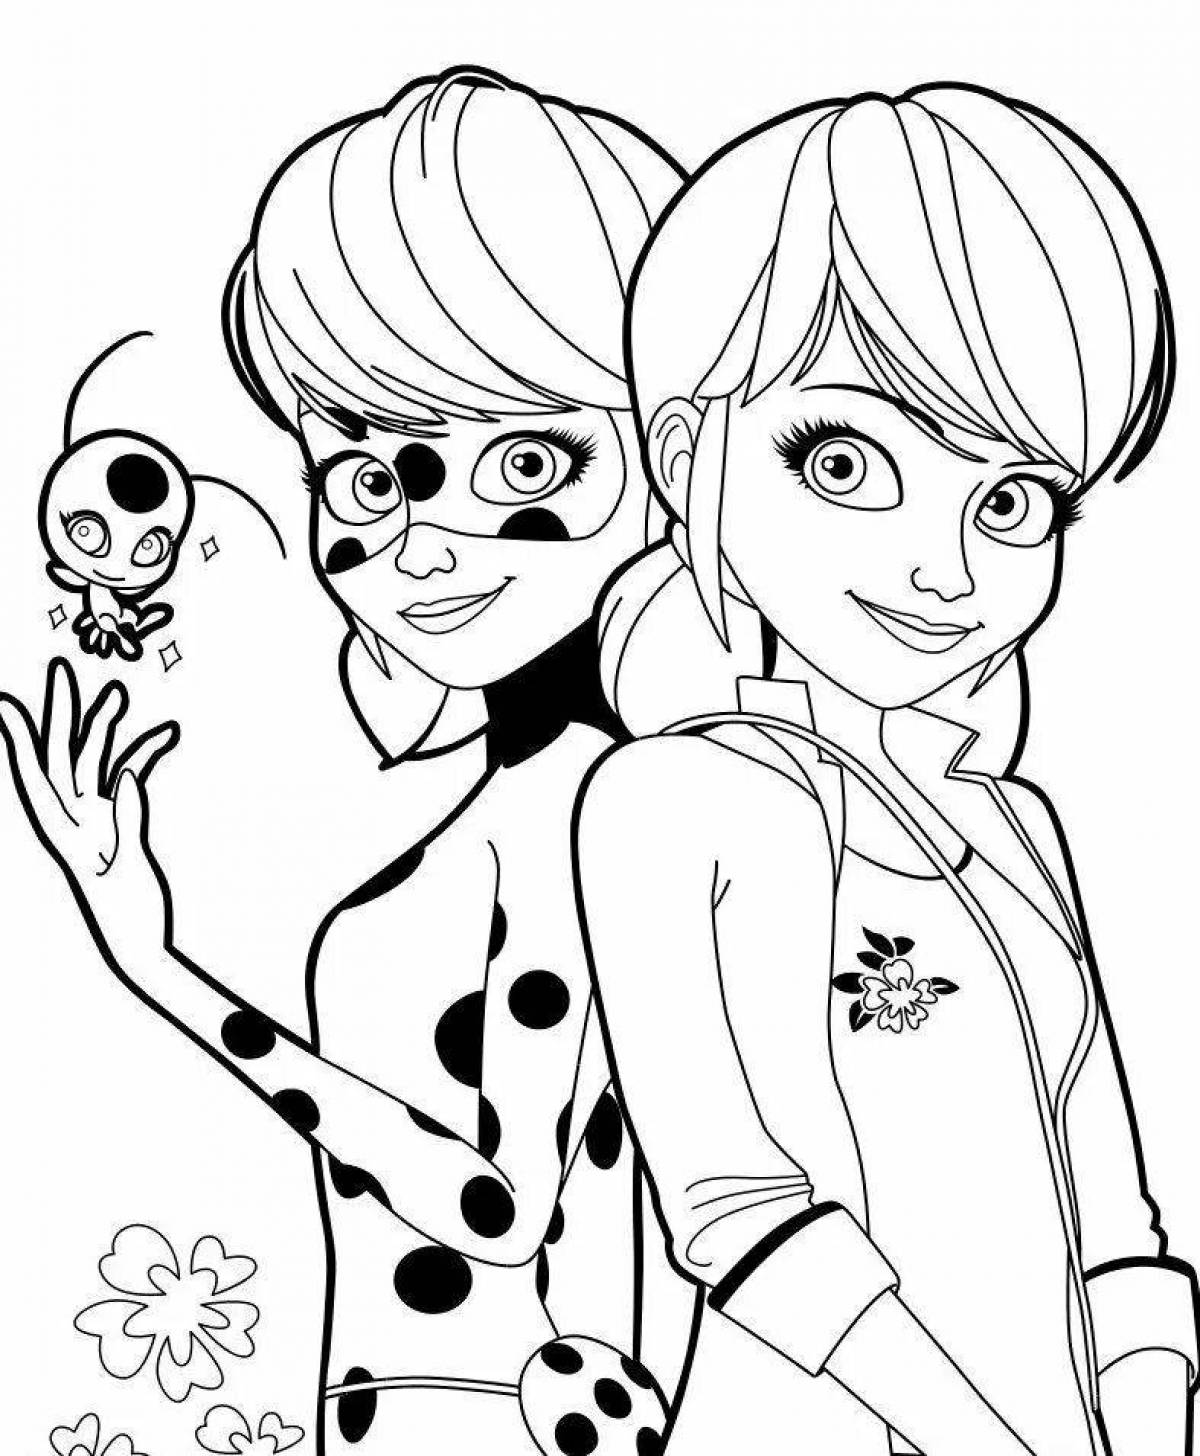 Coloring page playful lady buck